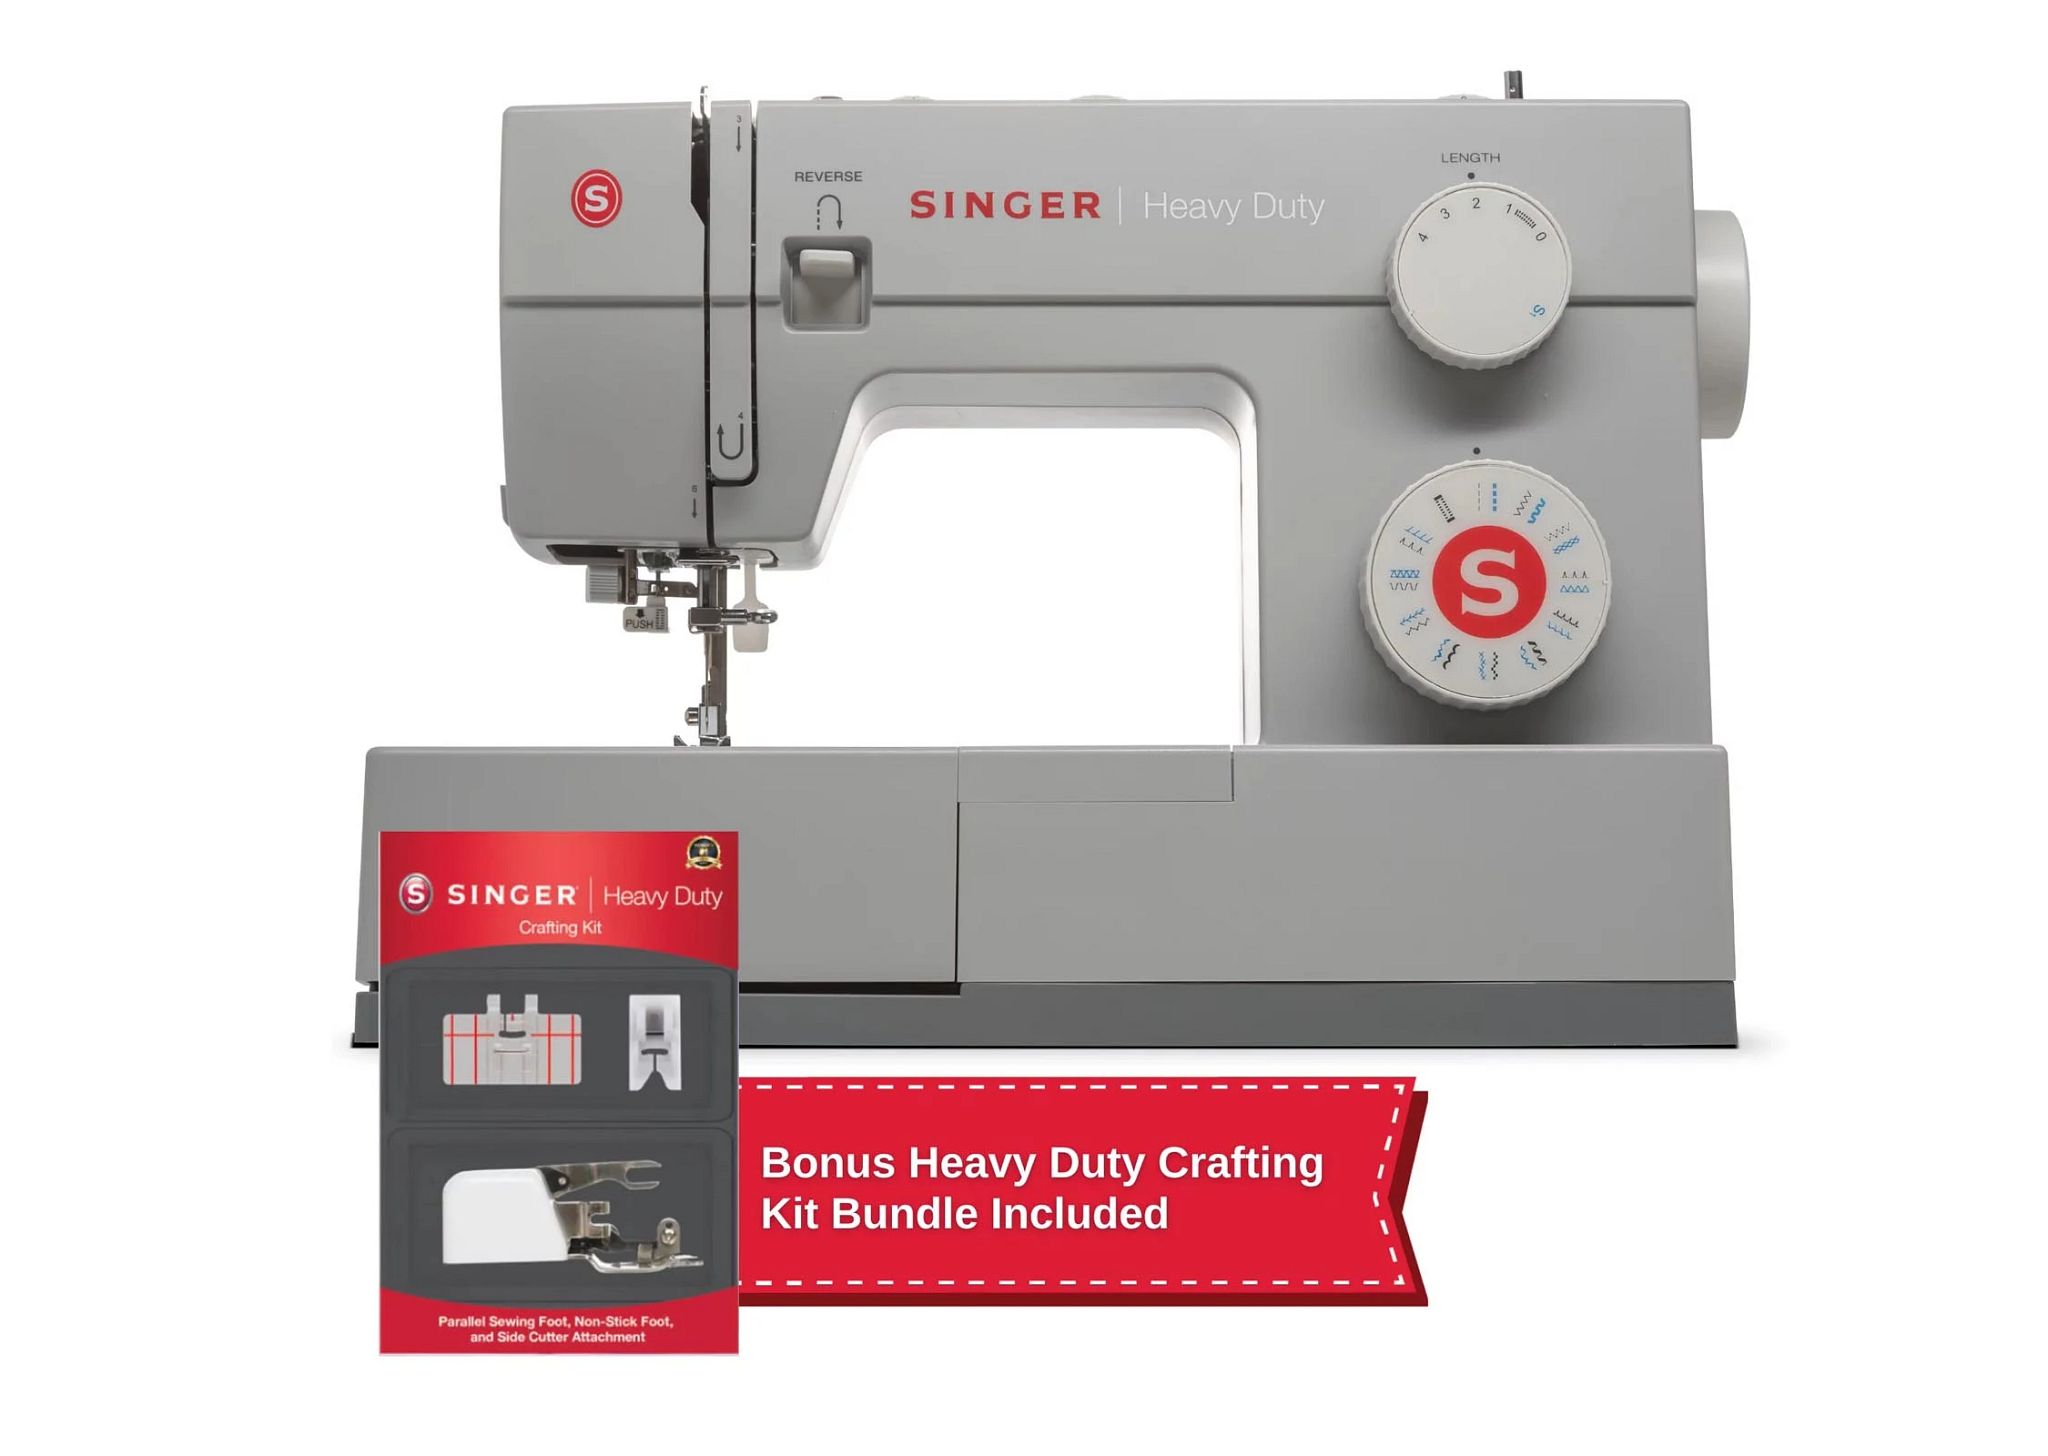 Heavy Duty 44S Sewing Machine and Crafting Kit